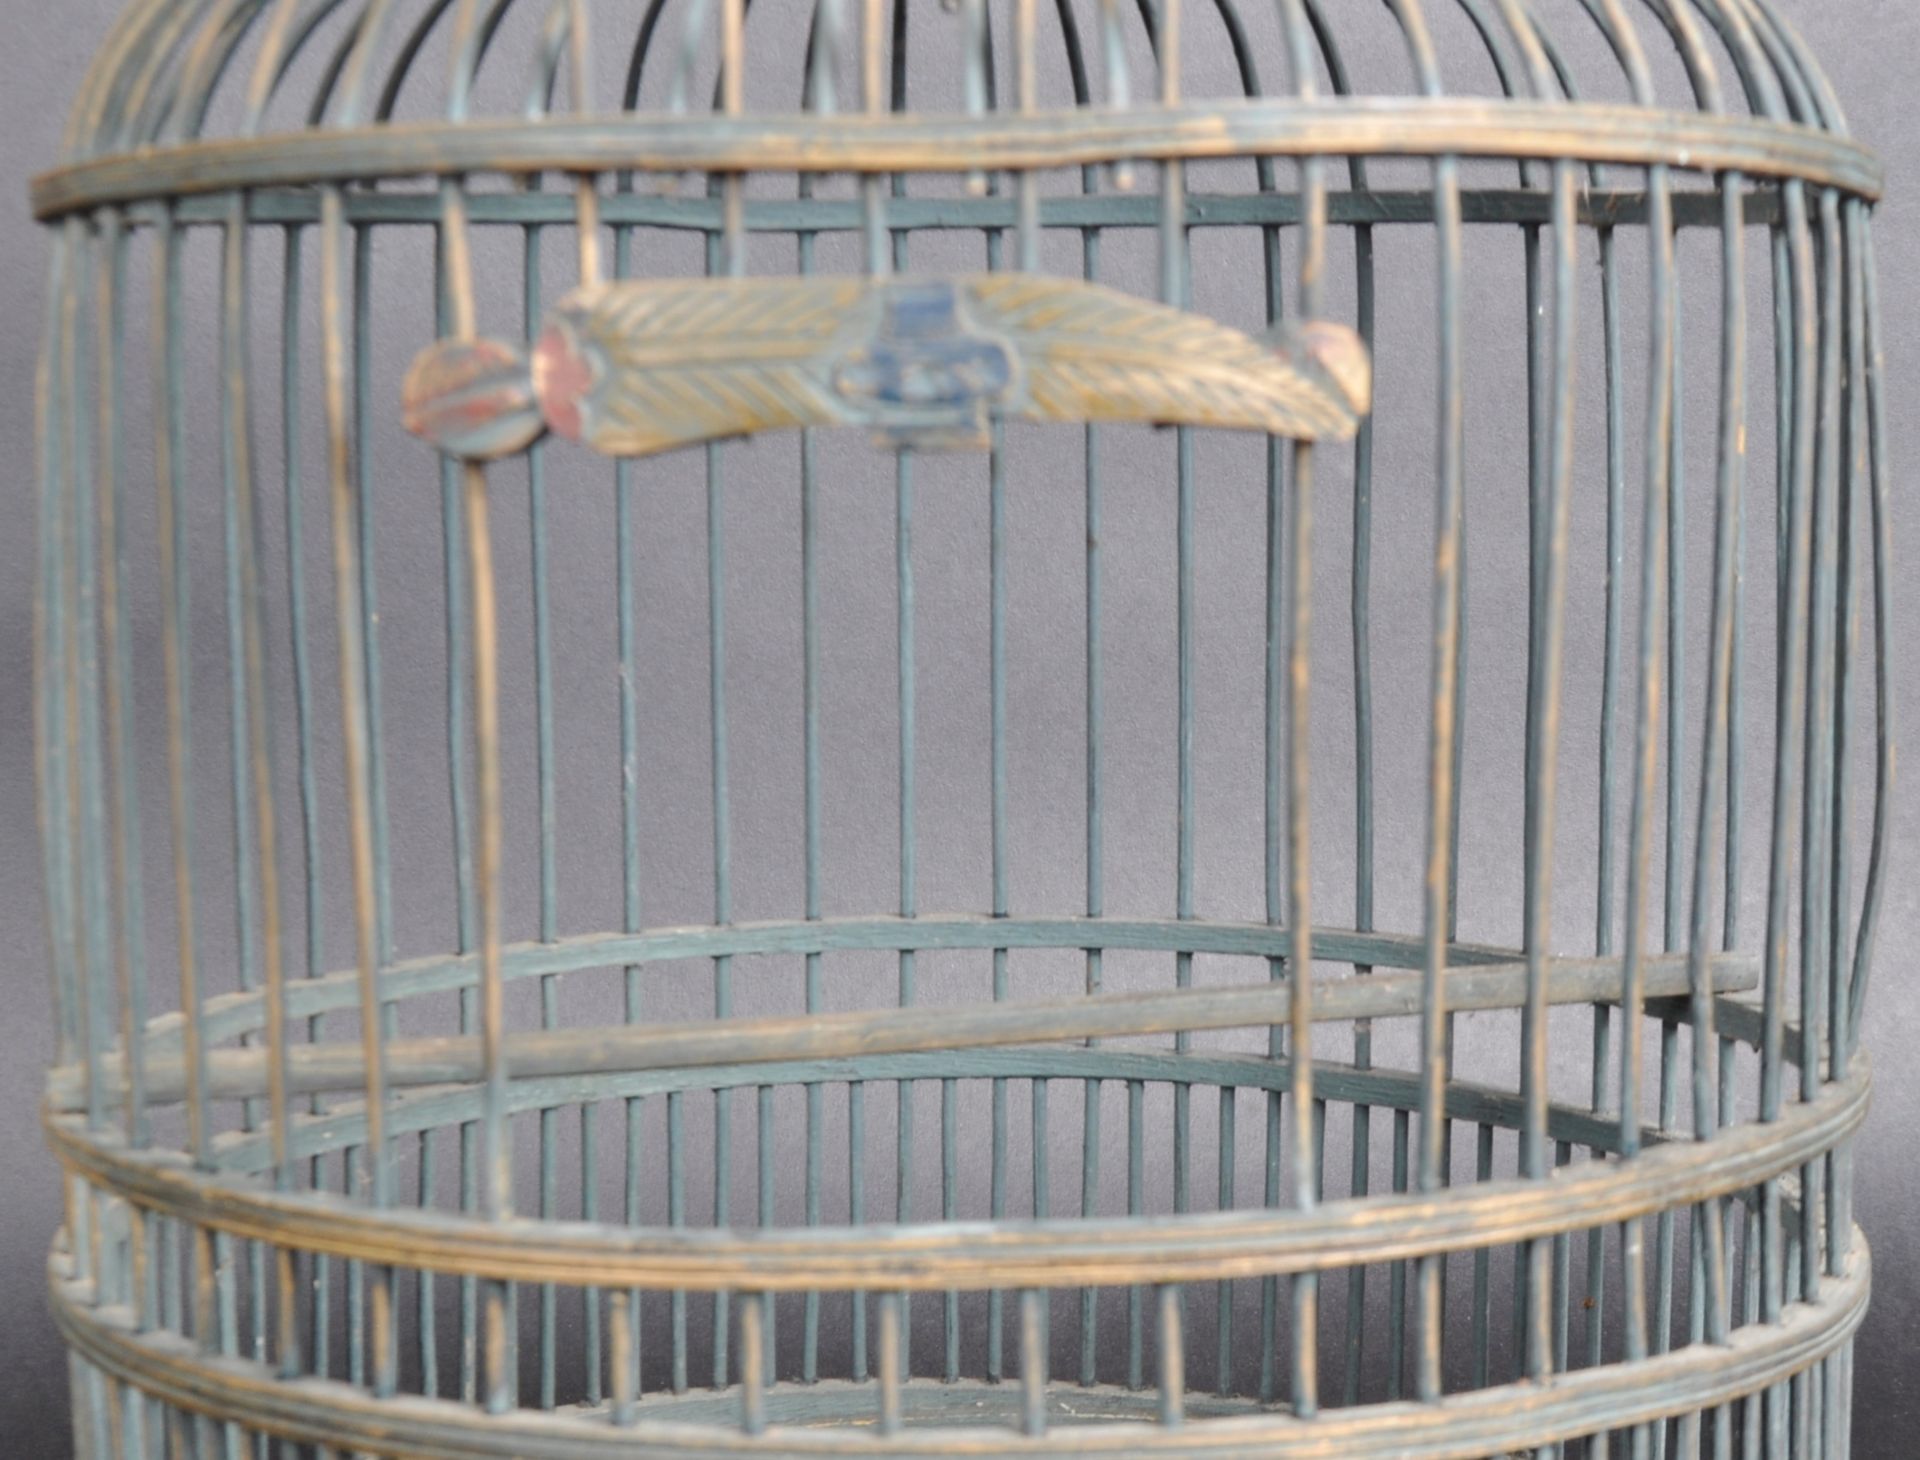 EARLY 20TH CENTURY CHINESE WOODEN BIRDCAGE - Image 6 of 6